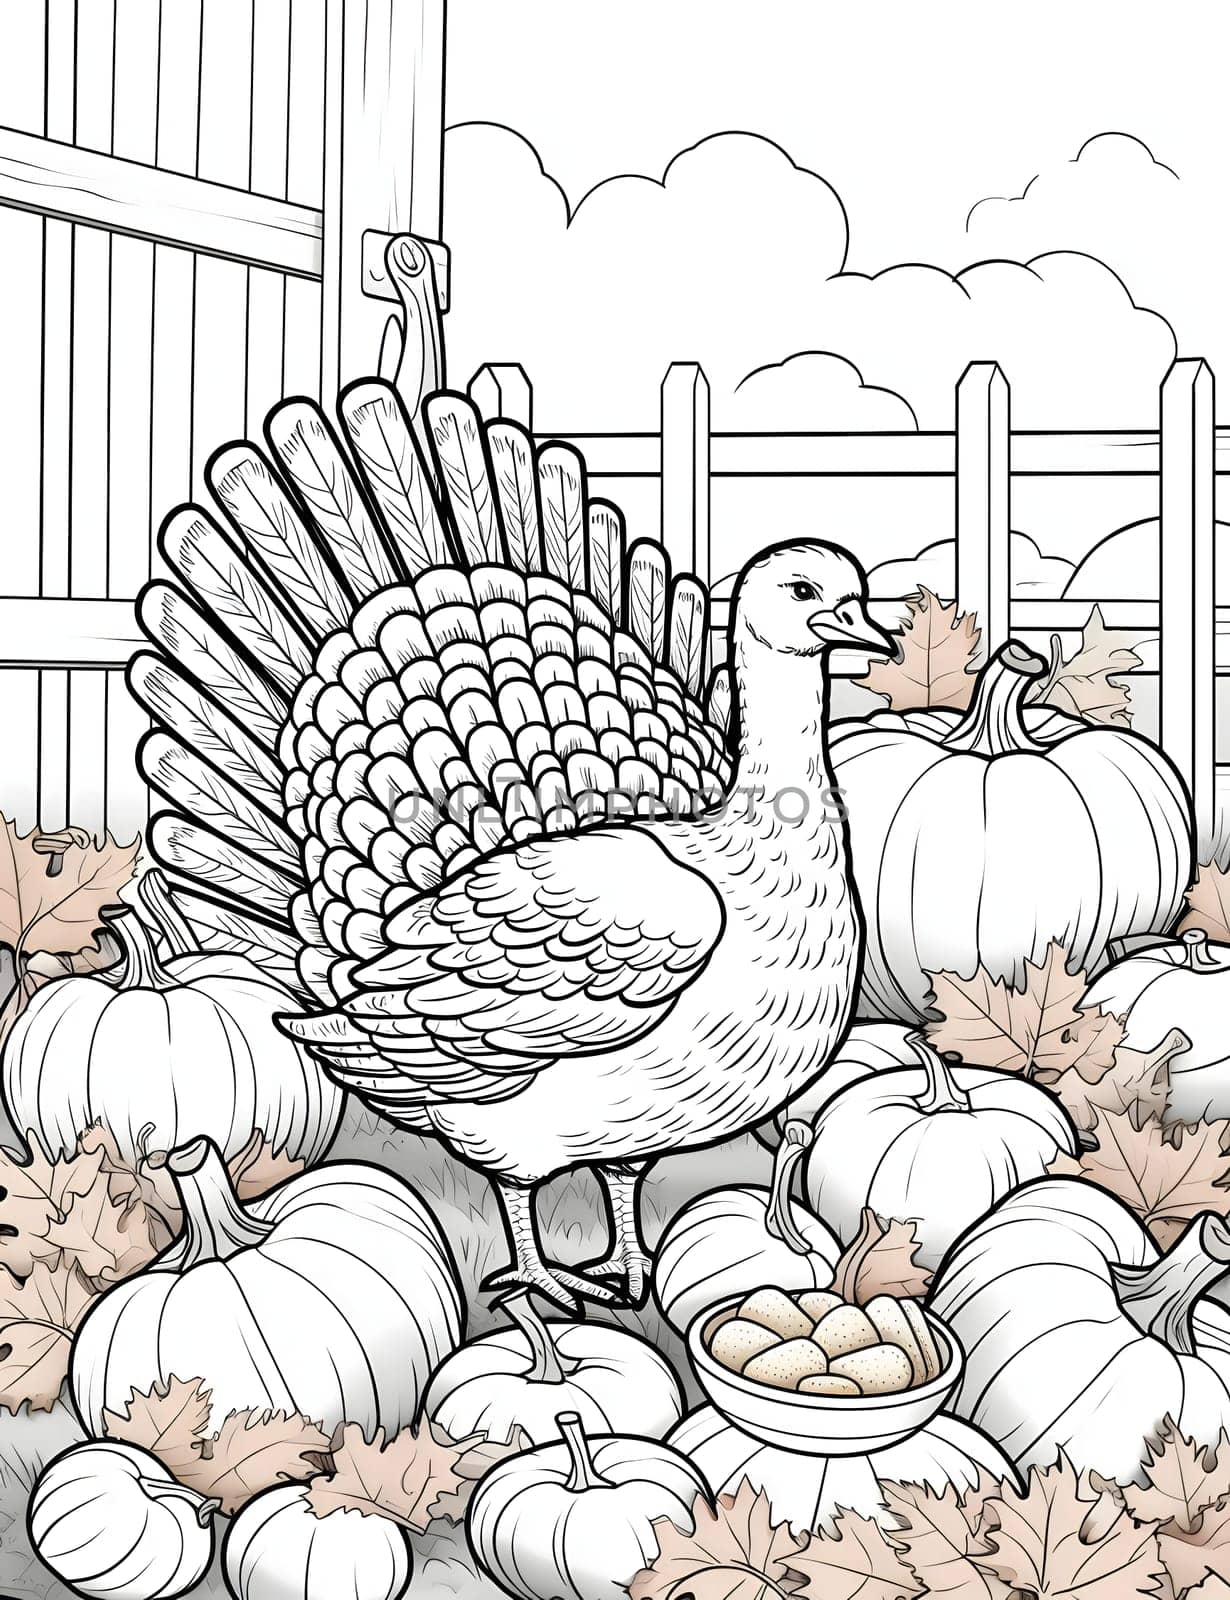 Black and White coloring book young turkey around pumpkin farm leaves. Turkey as the main dish of thanksgiving for the harvest. An atmosphere of joy and celebration.